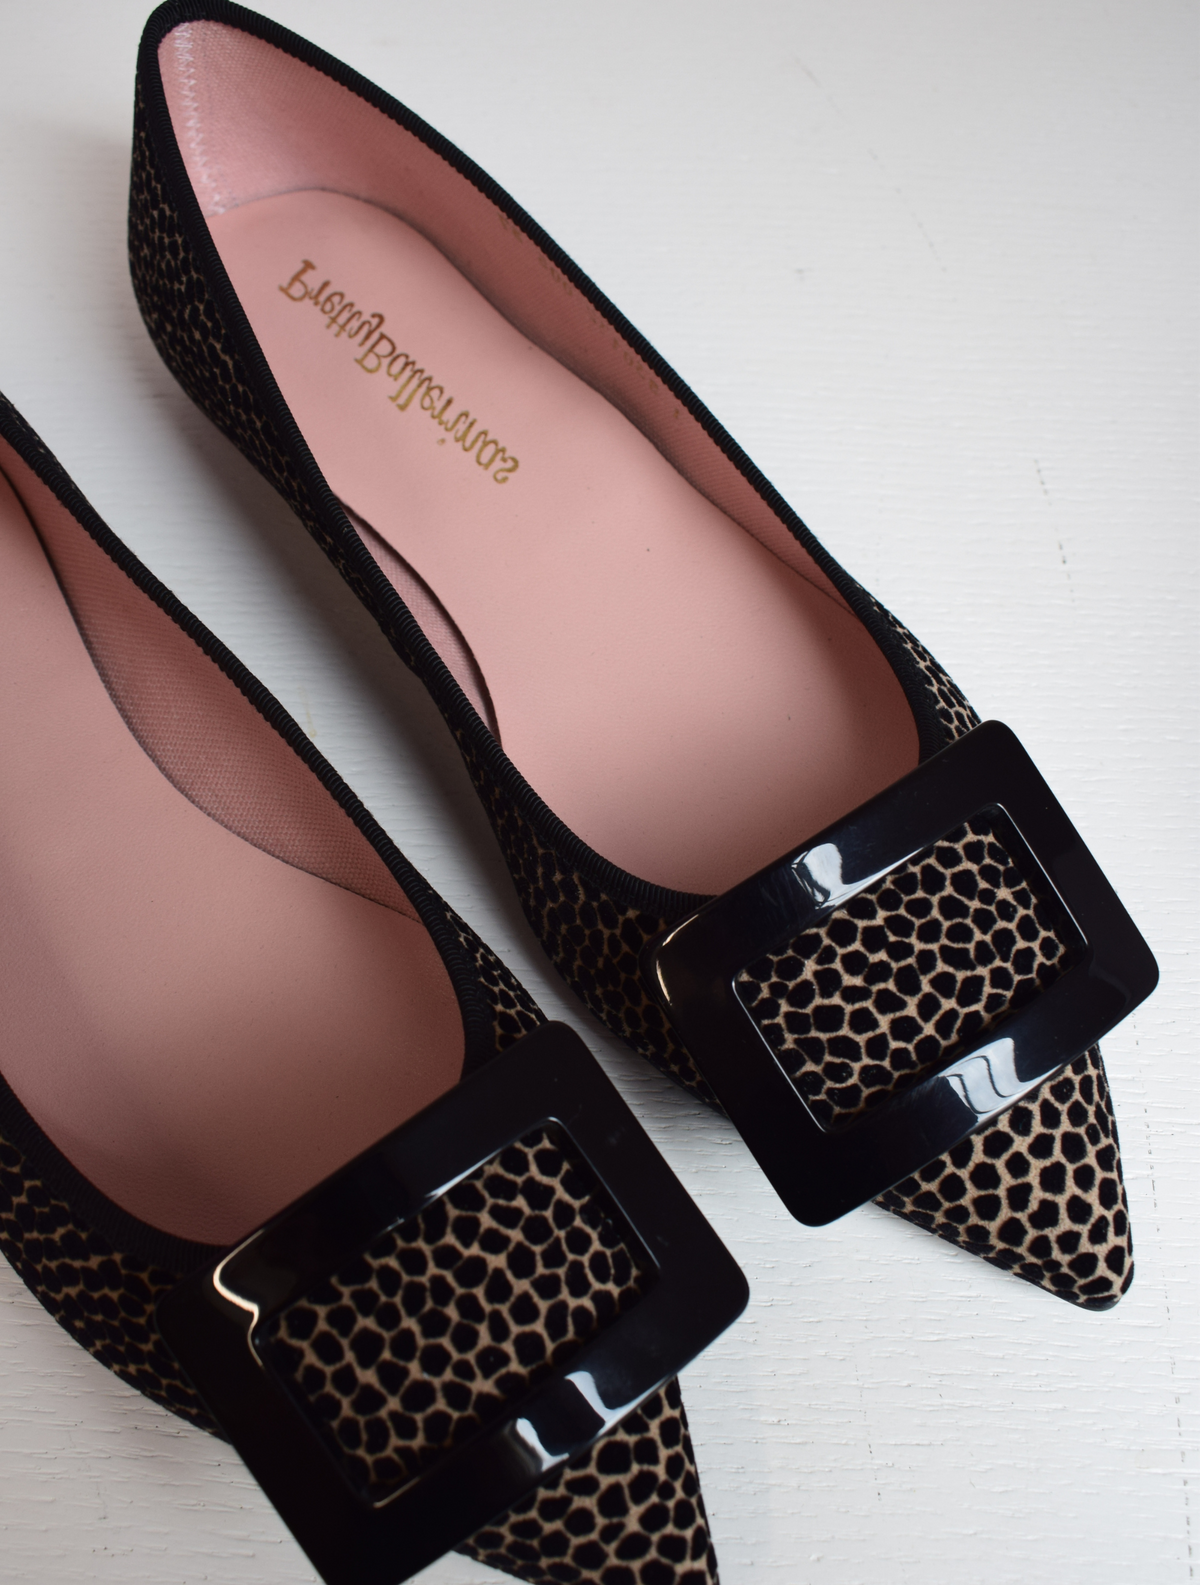 Cheetah print textured fabric ballet shoes with pointed toe